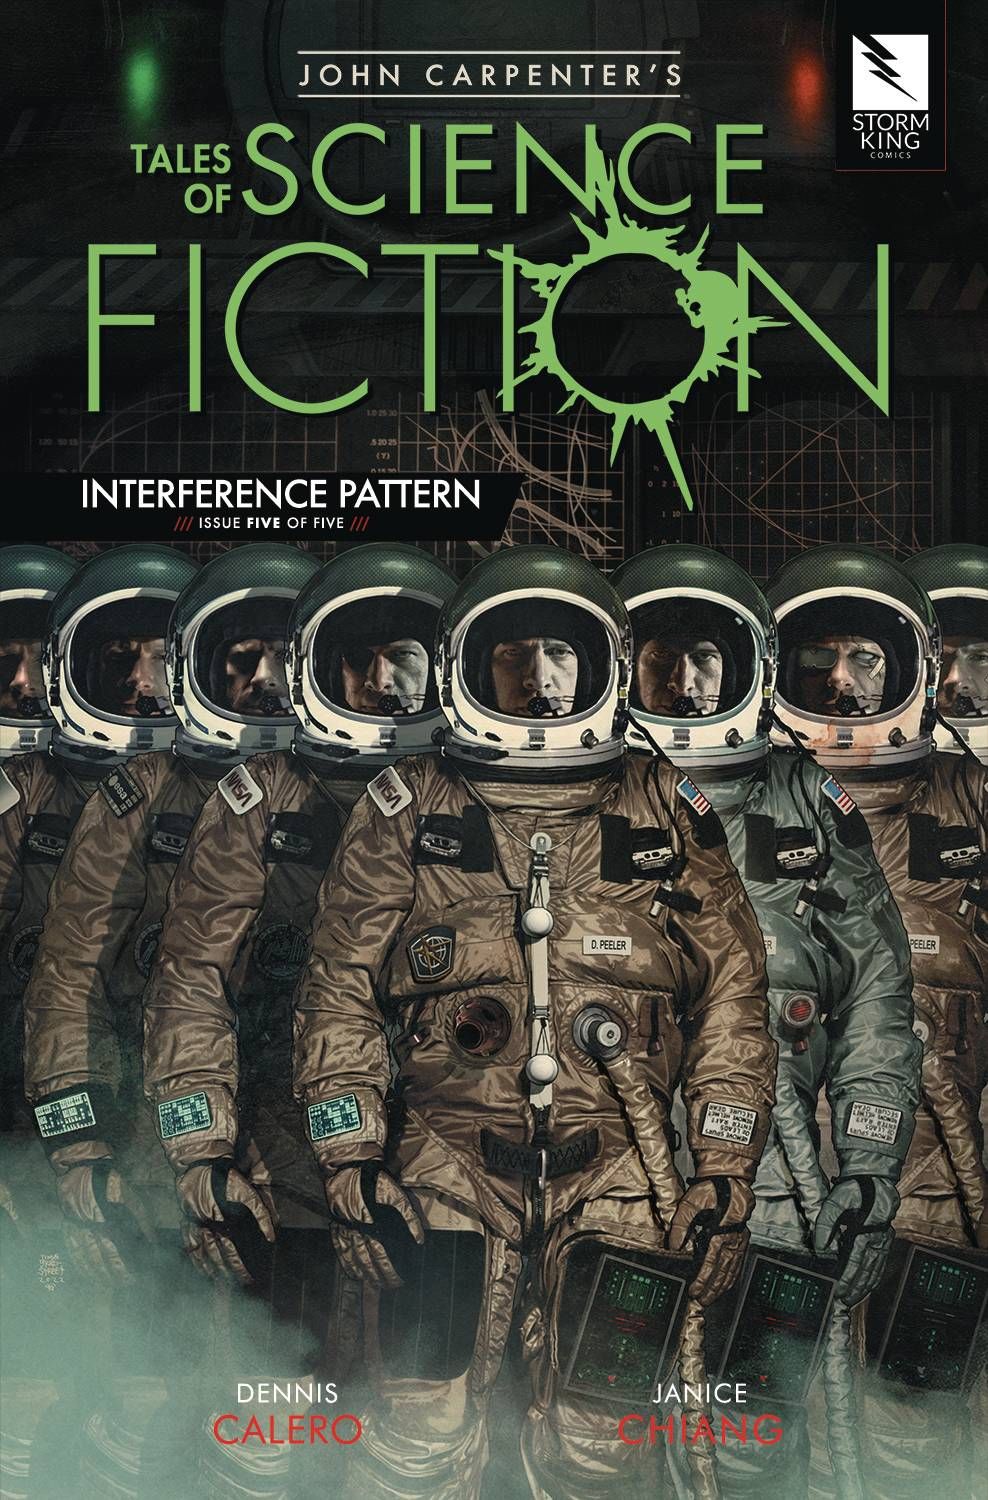 John Carpenter's Tales of Science-Fiction: Interference Pattern #5 Comic